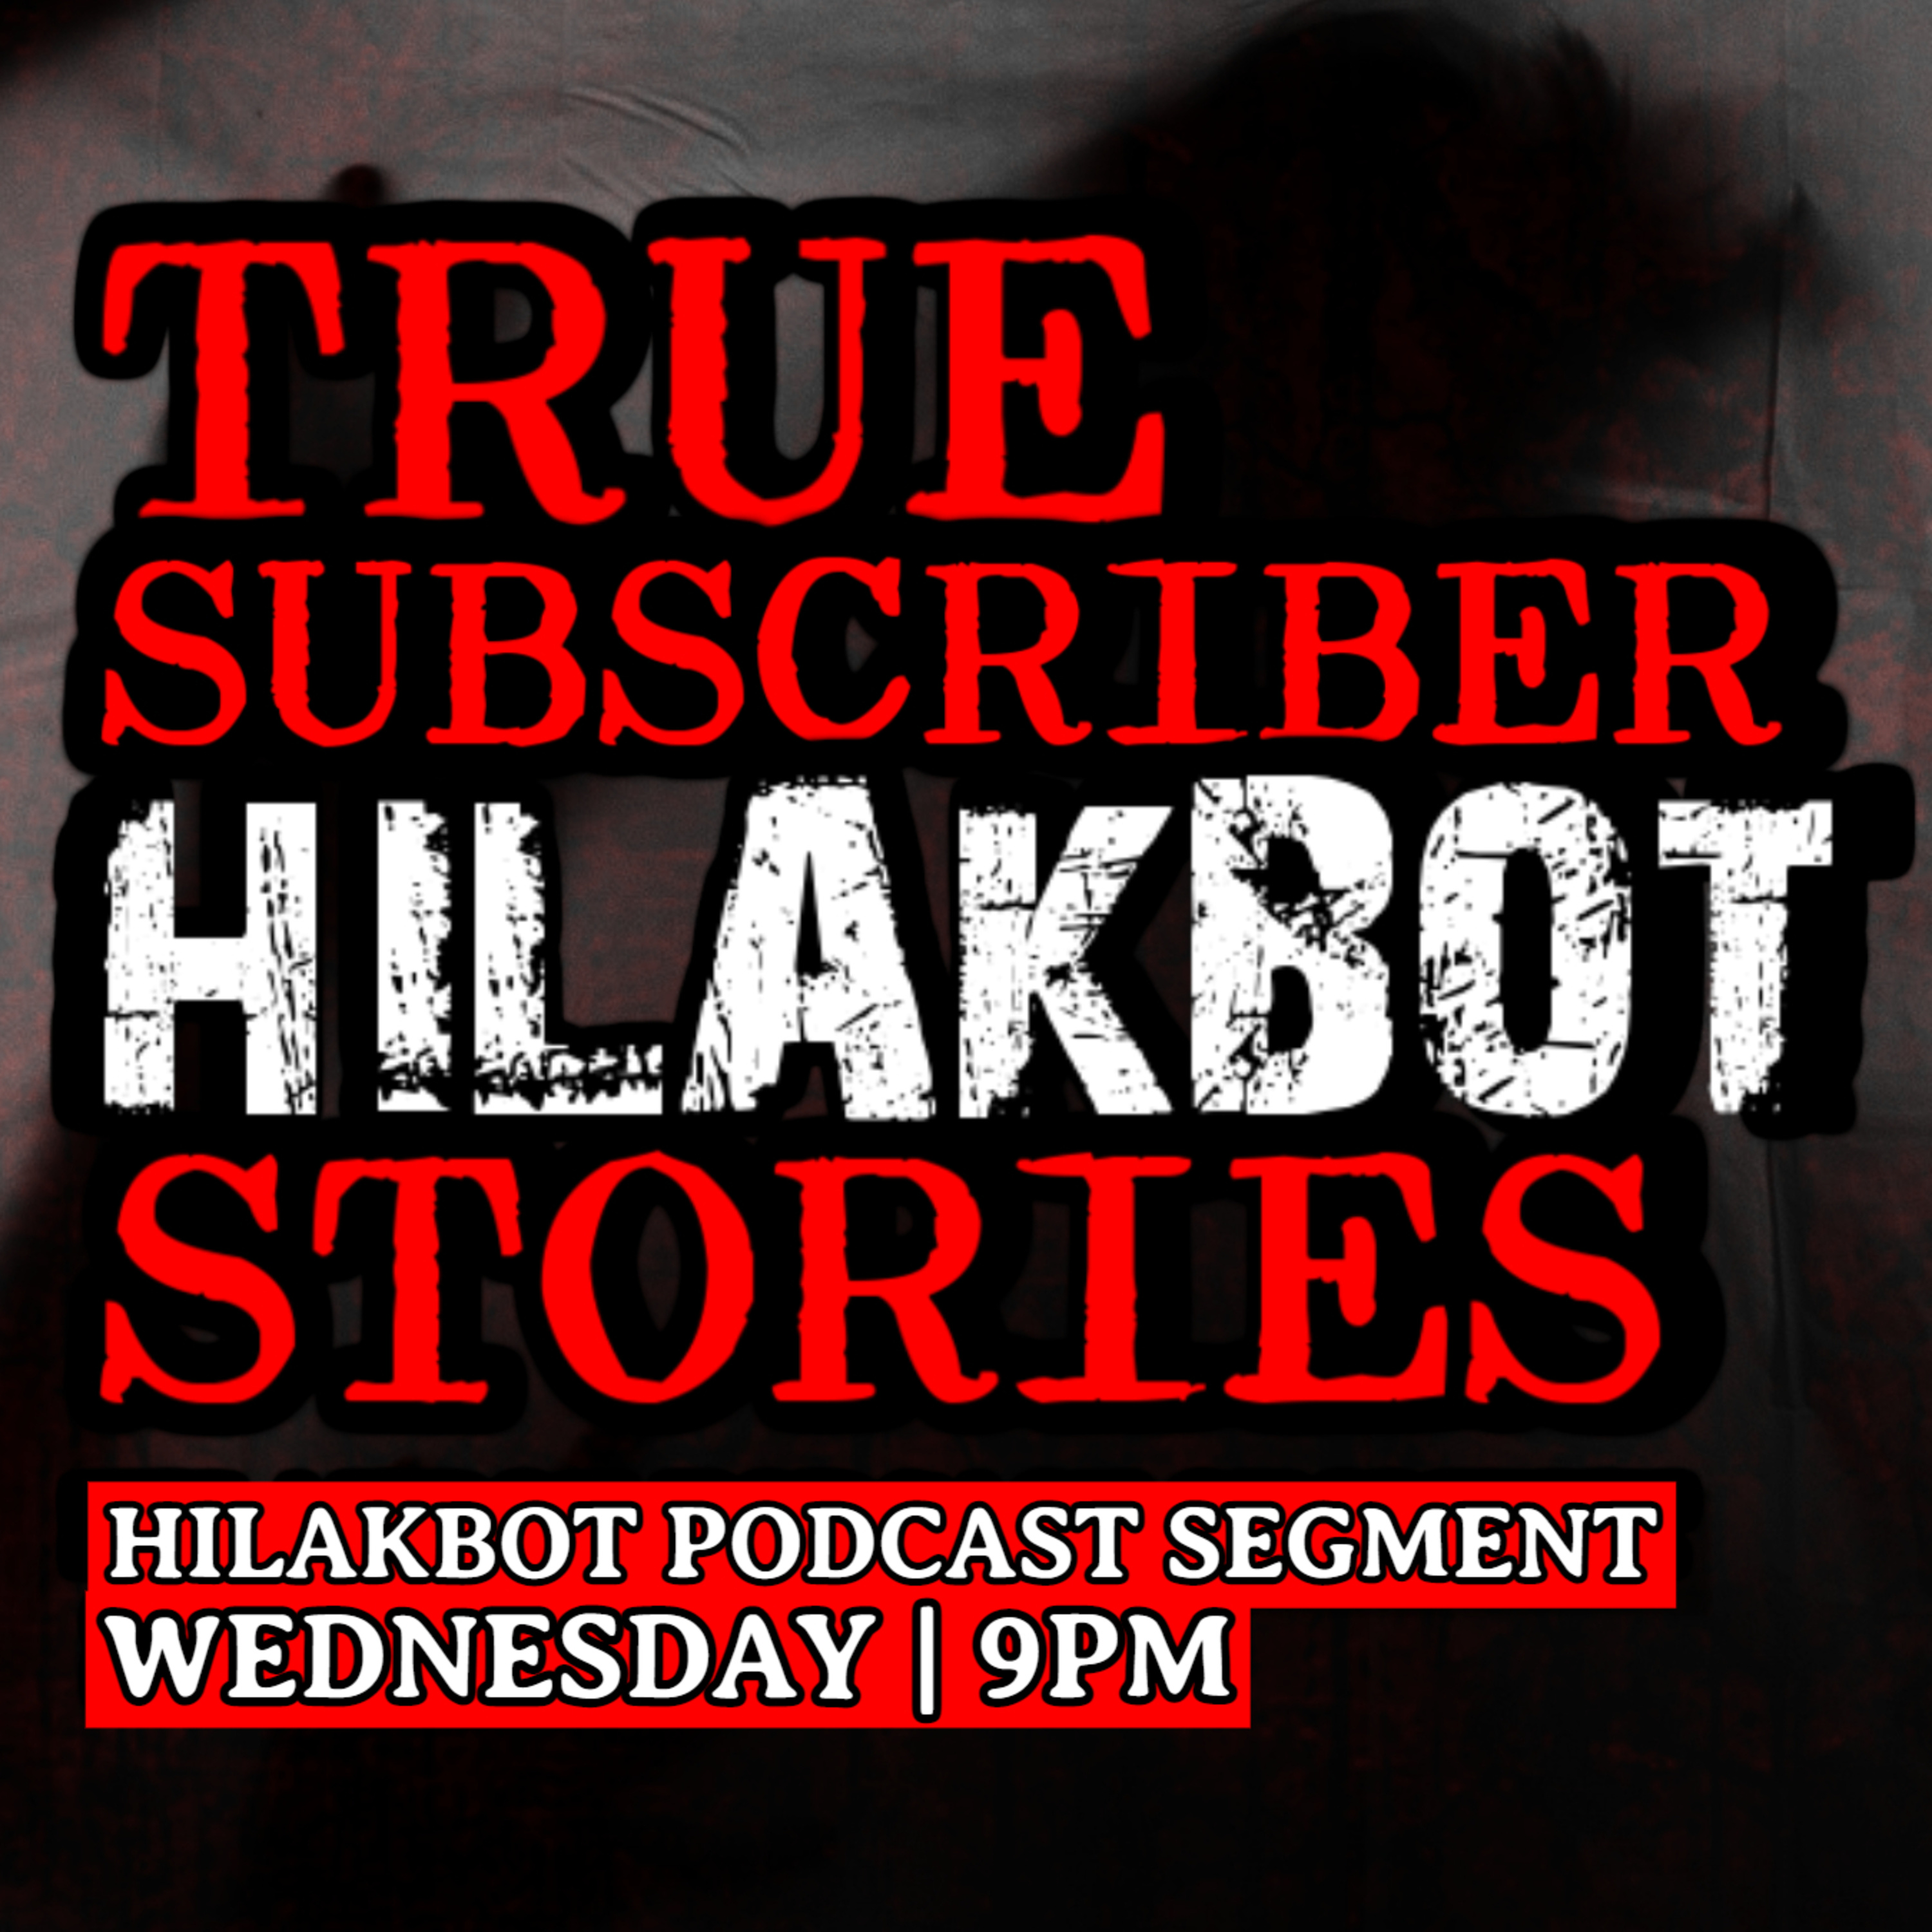 TRUE SUBSCRIBER'S HILAKBOT STORIES 11 | Listener's Submitted Scary Stories | HTV Segment